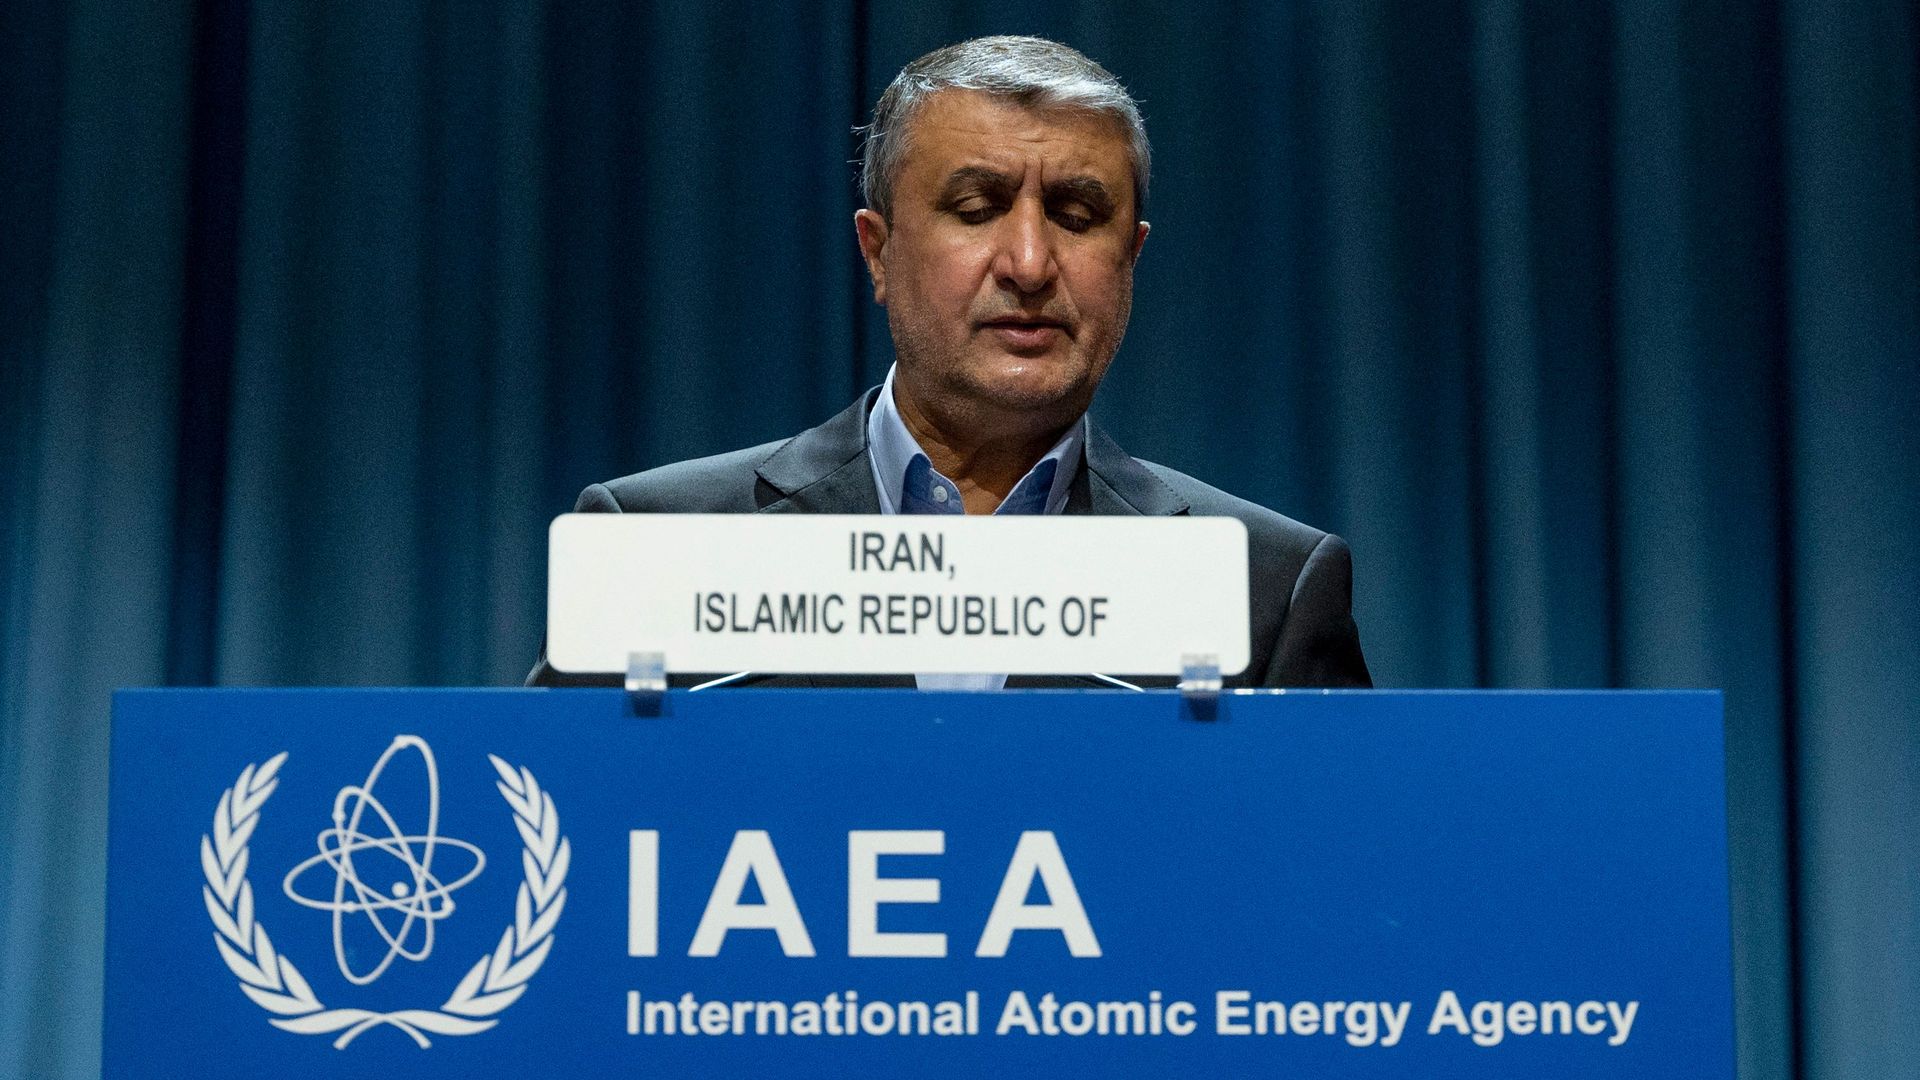 Chief of the Atomic Energy Organization of Iran Mohammad Eslami is seen addressing the International Atomic Energy Agency General Conference in September